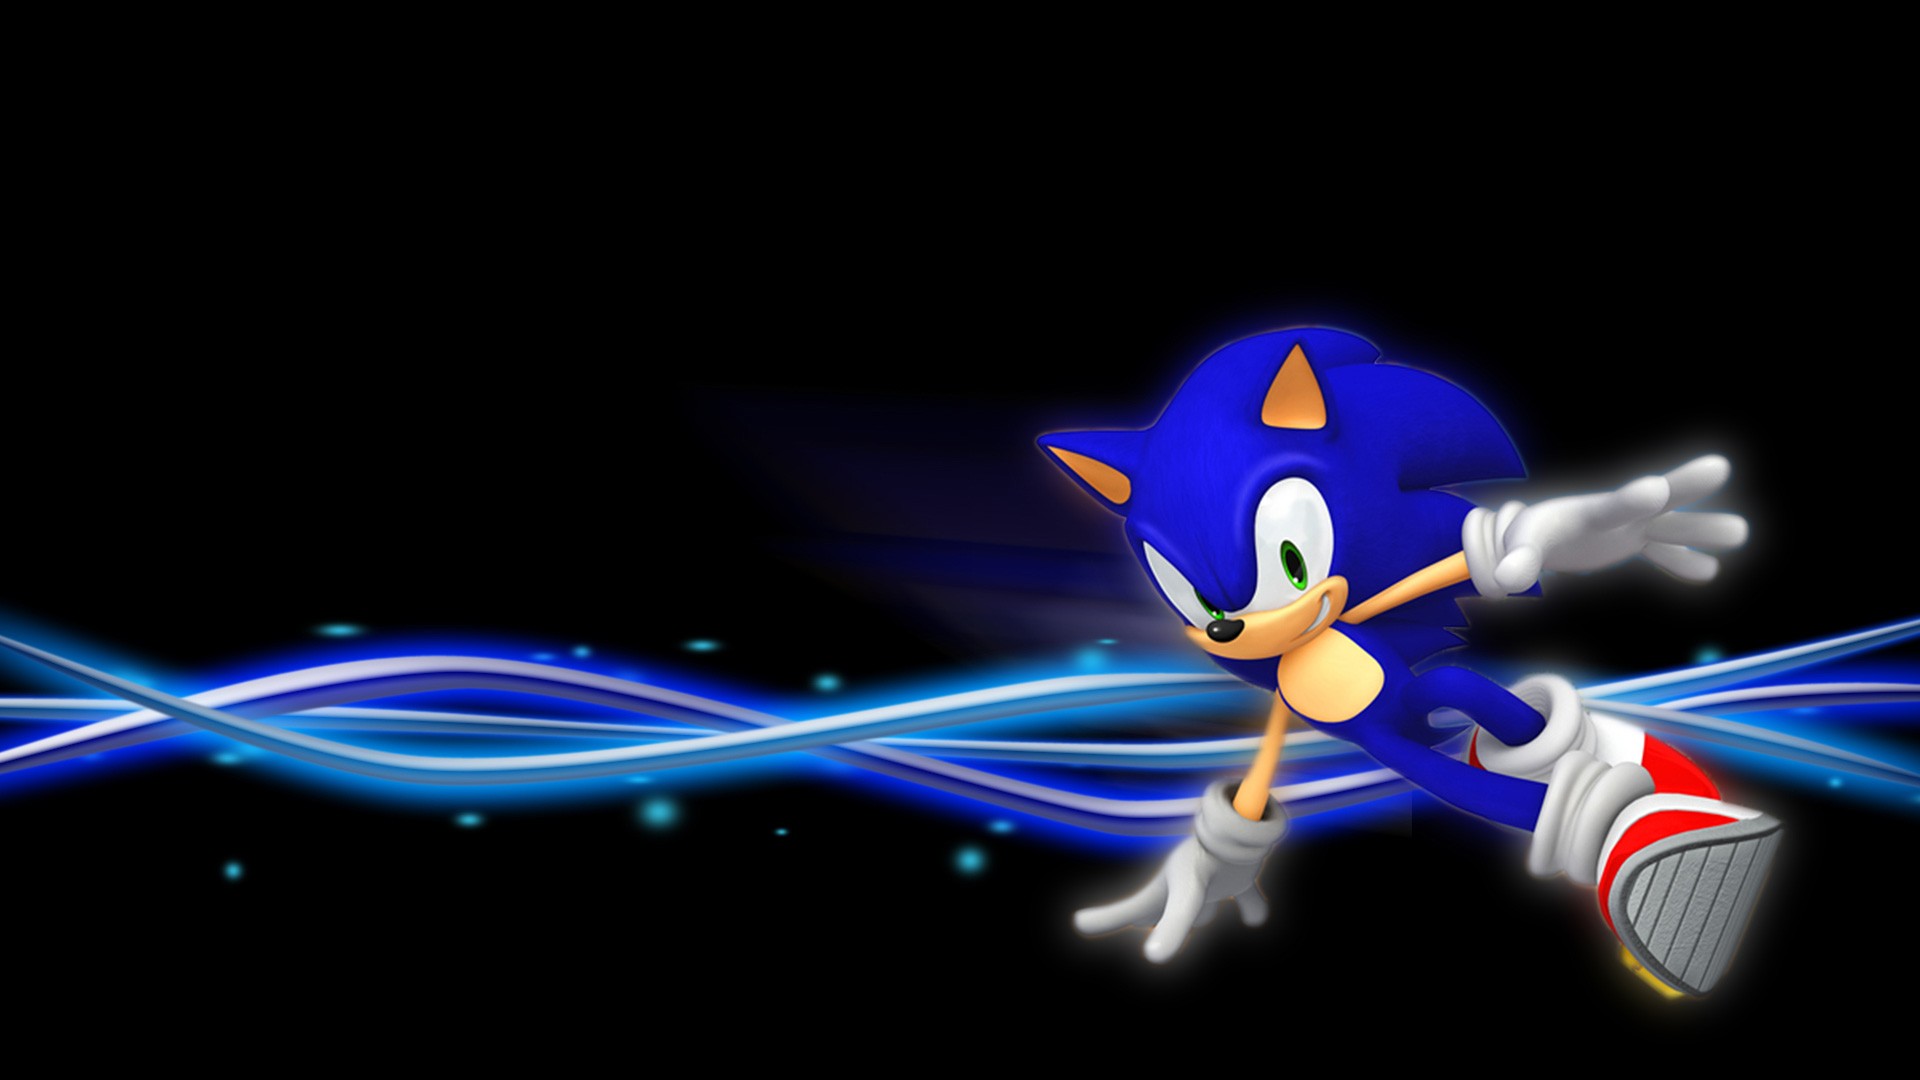 Sonic The Hedgehog Characters On A Black Background, Pictures Of All The Sonic  Characters, Character, Sonic Background Image And Wallpaper for Free  Download